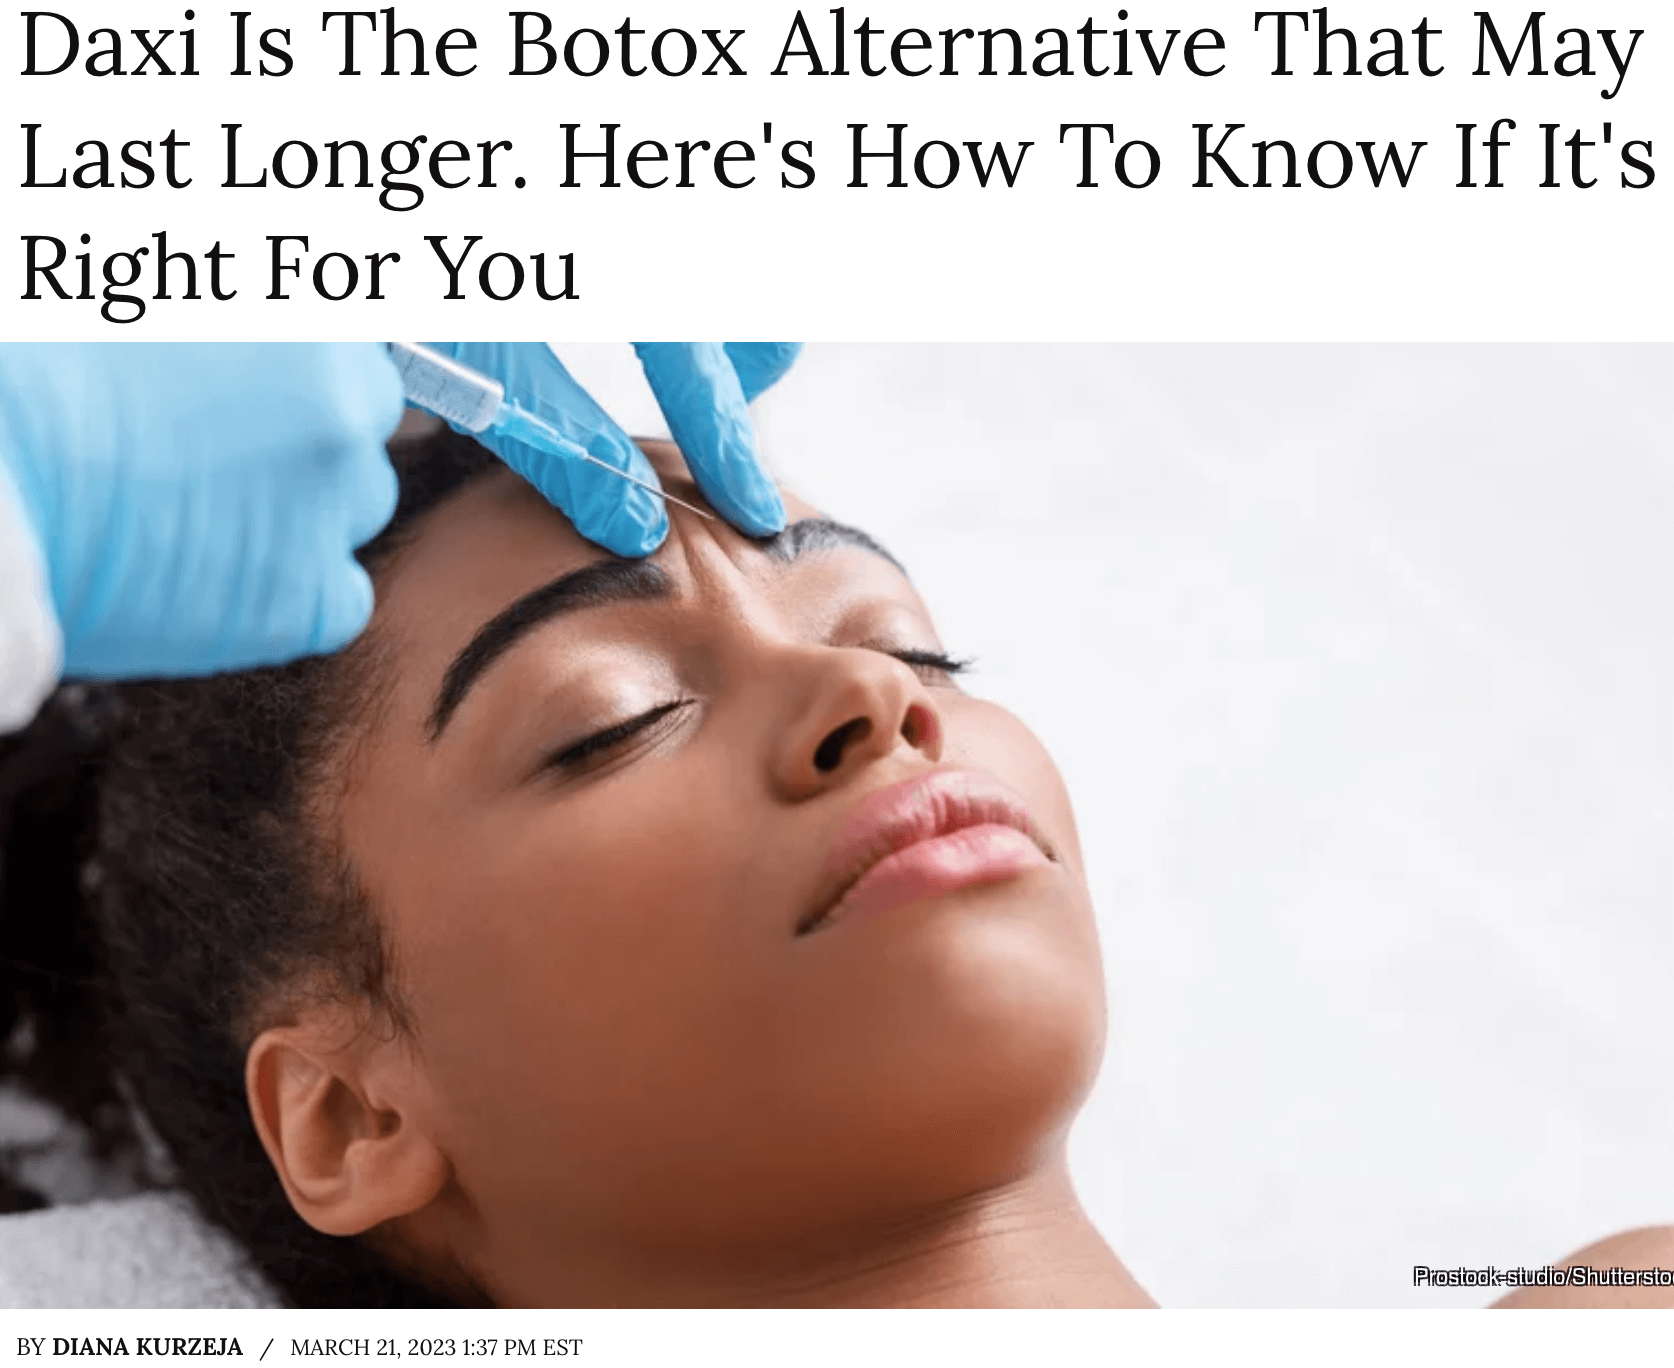 JUVA Skin & Laser Center Blog | Daxi Is The Botox Alternative That May Last Longer. Here's How To Know If It's Right For You